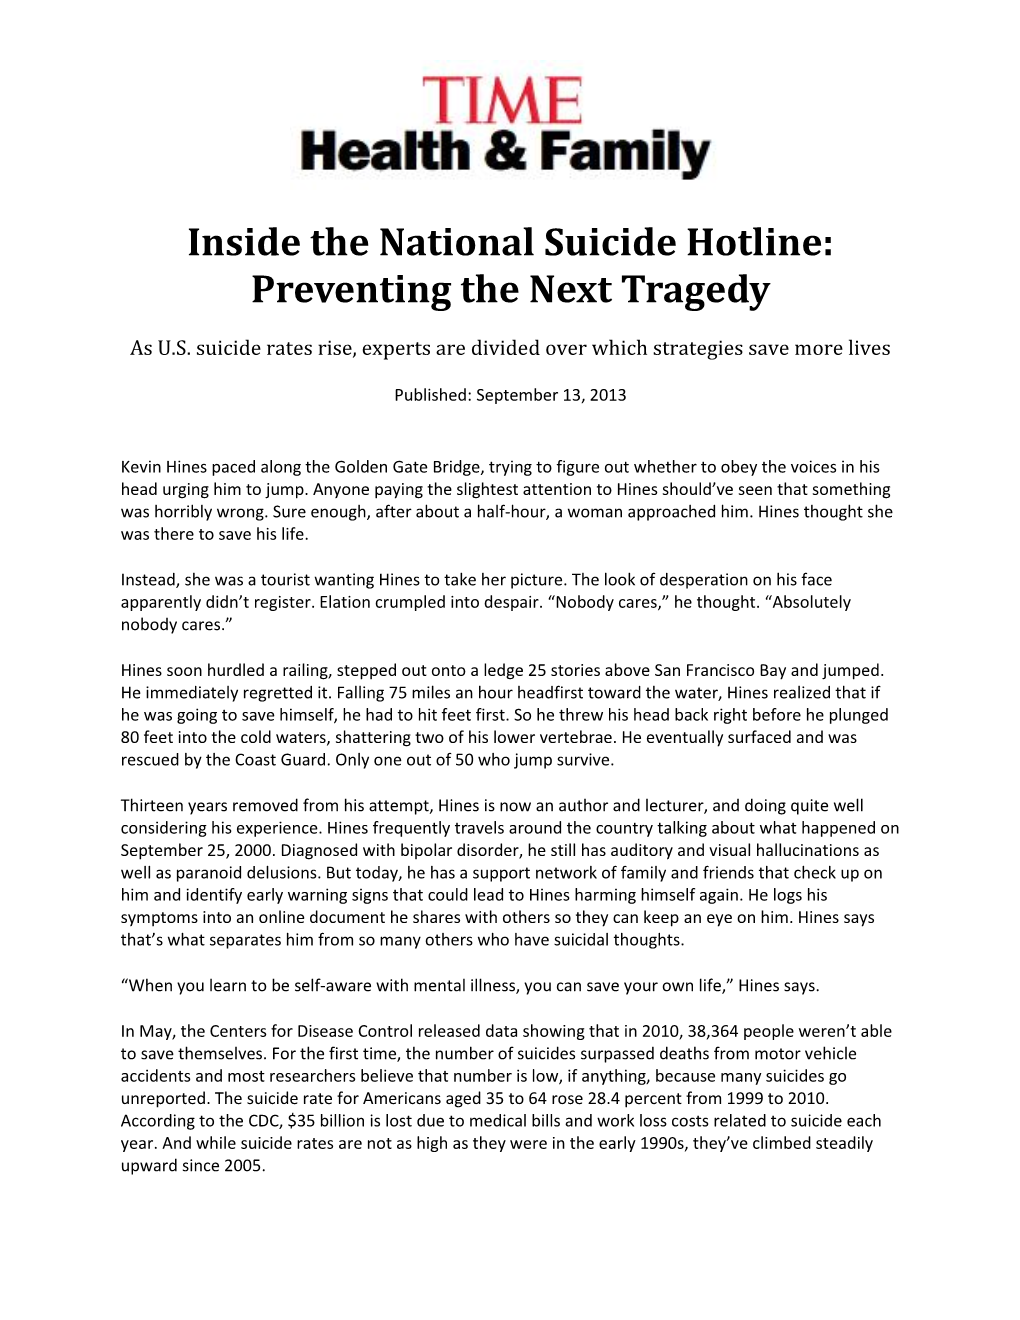 Inside the National Suicide Hotline: Preventing the Next Tragedy